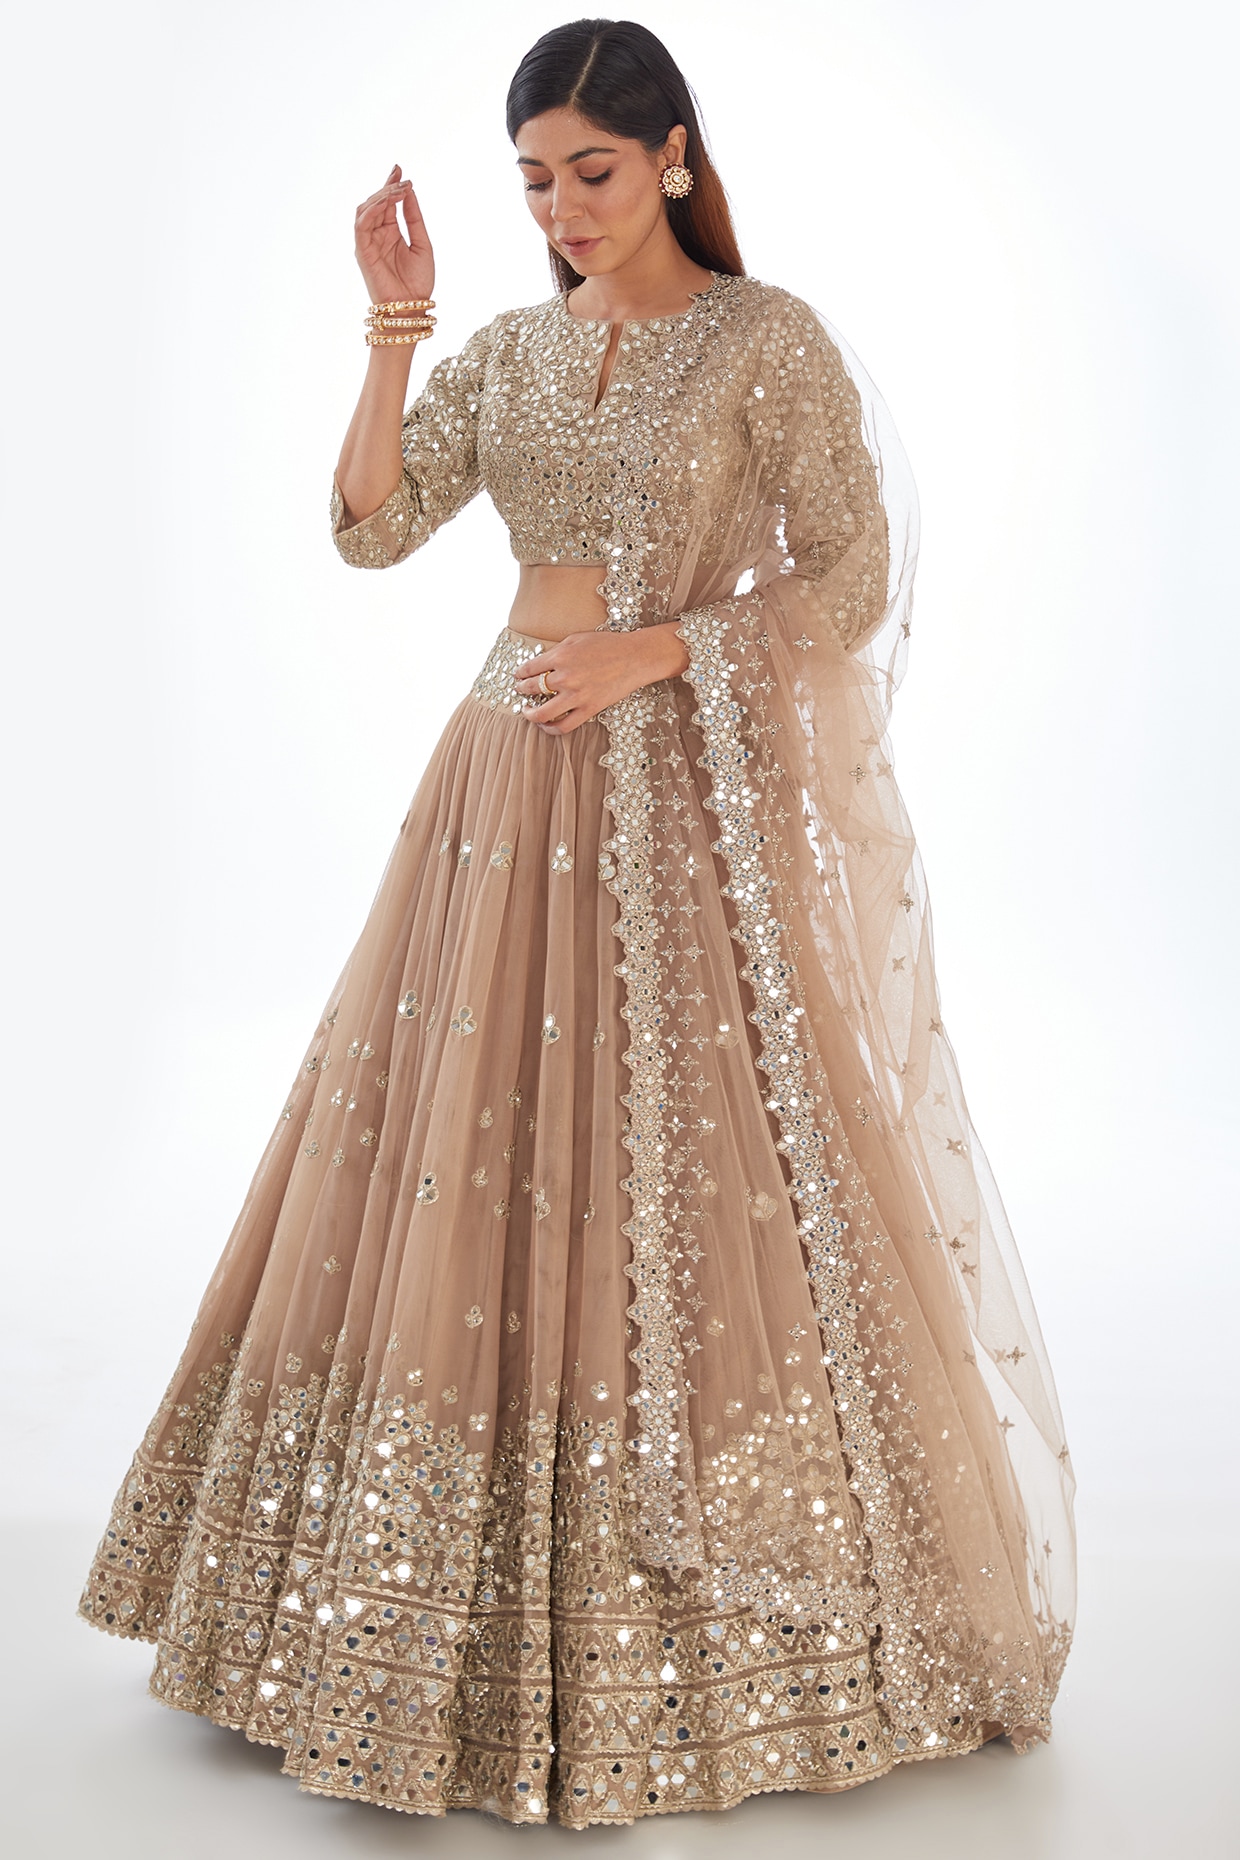 Abhinav Mishra's Spring Couture Baraat is all about magical moments